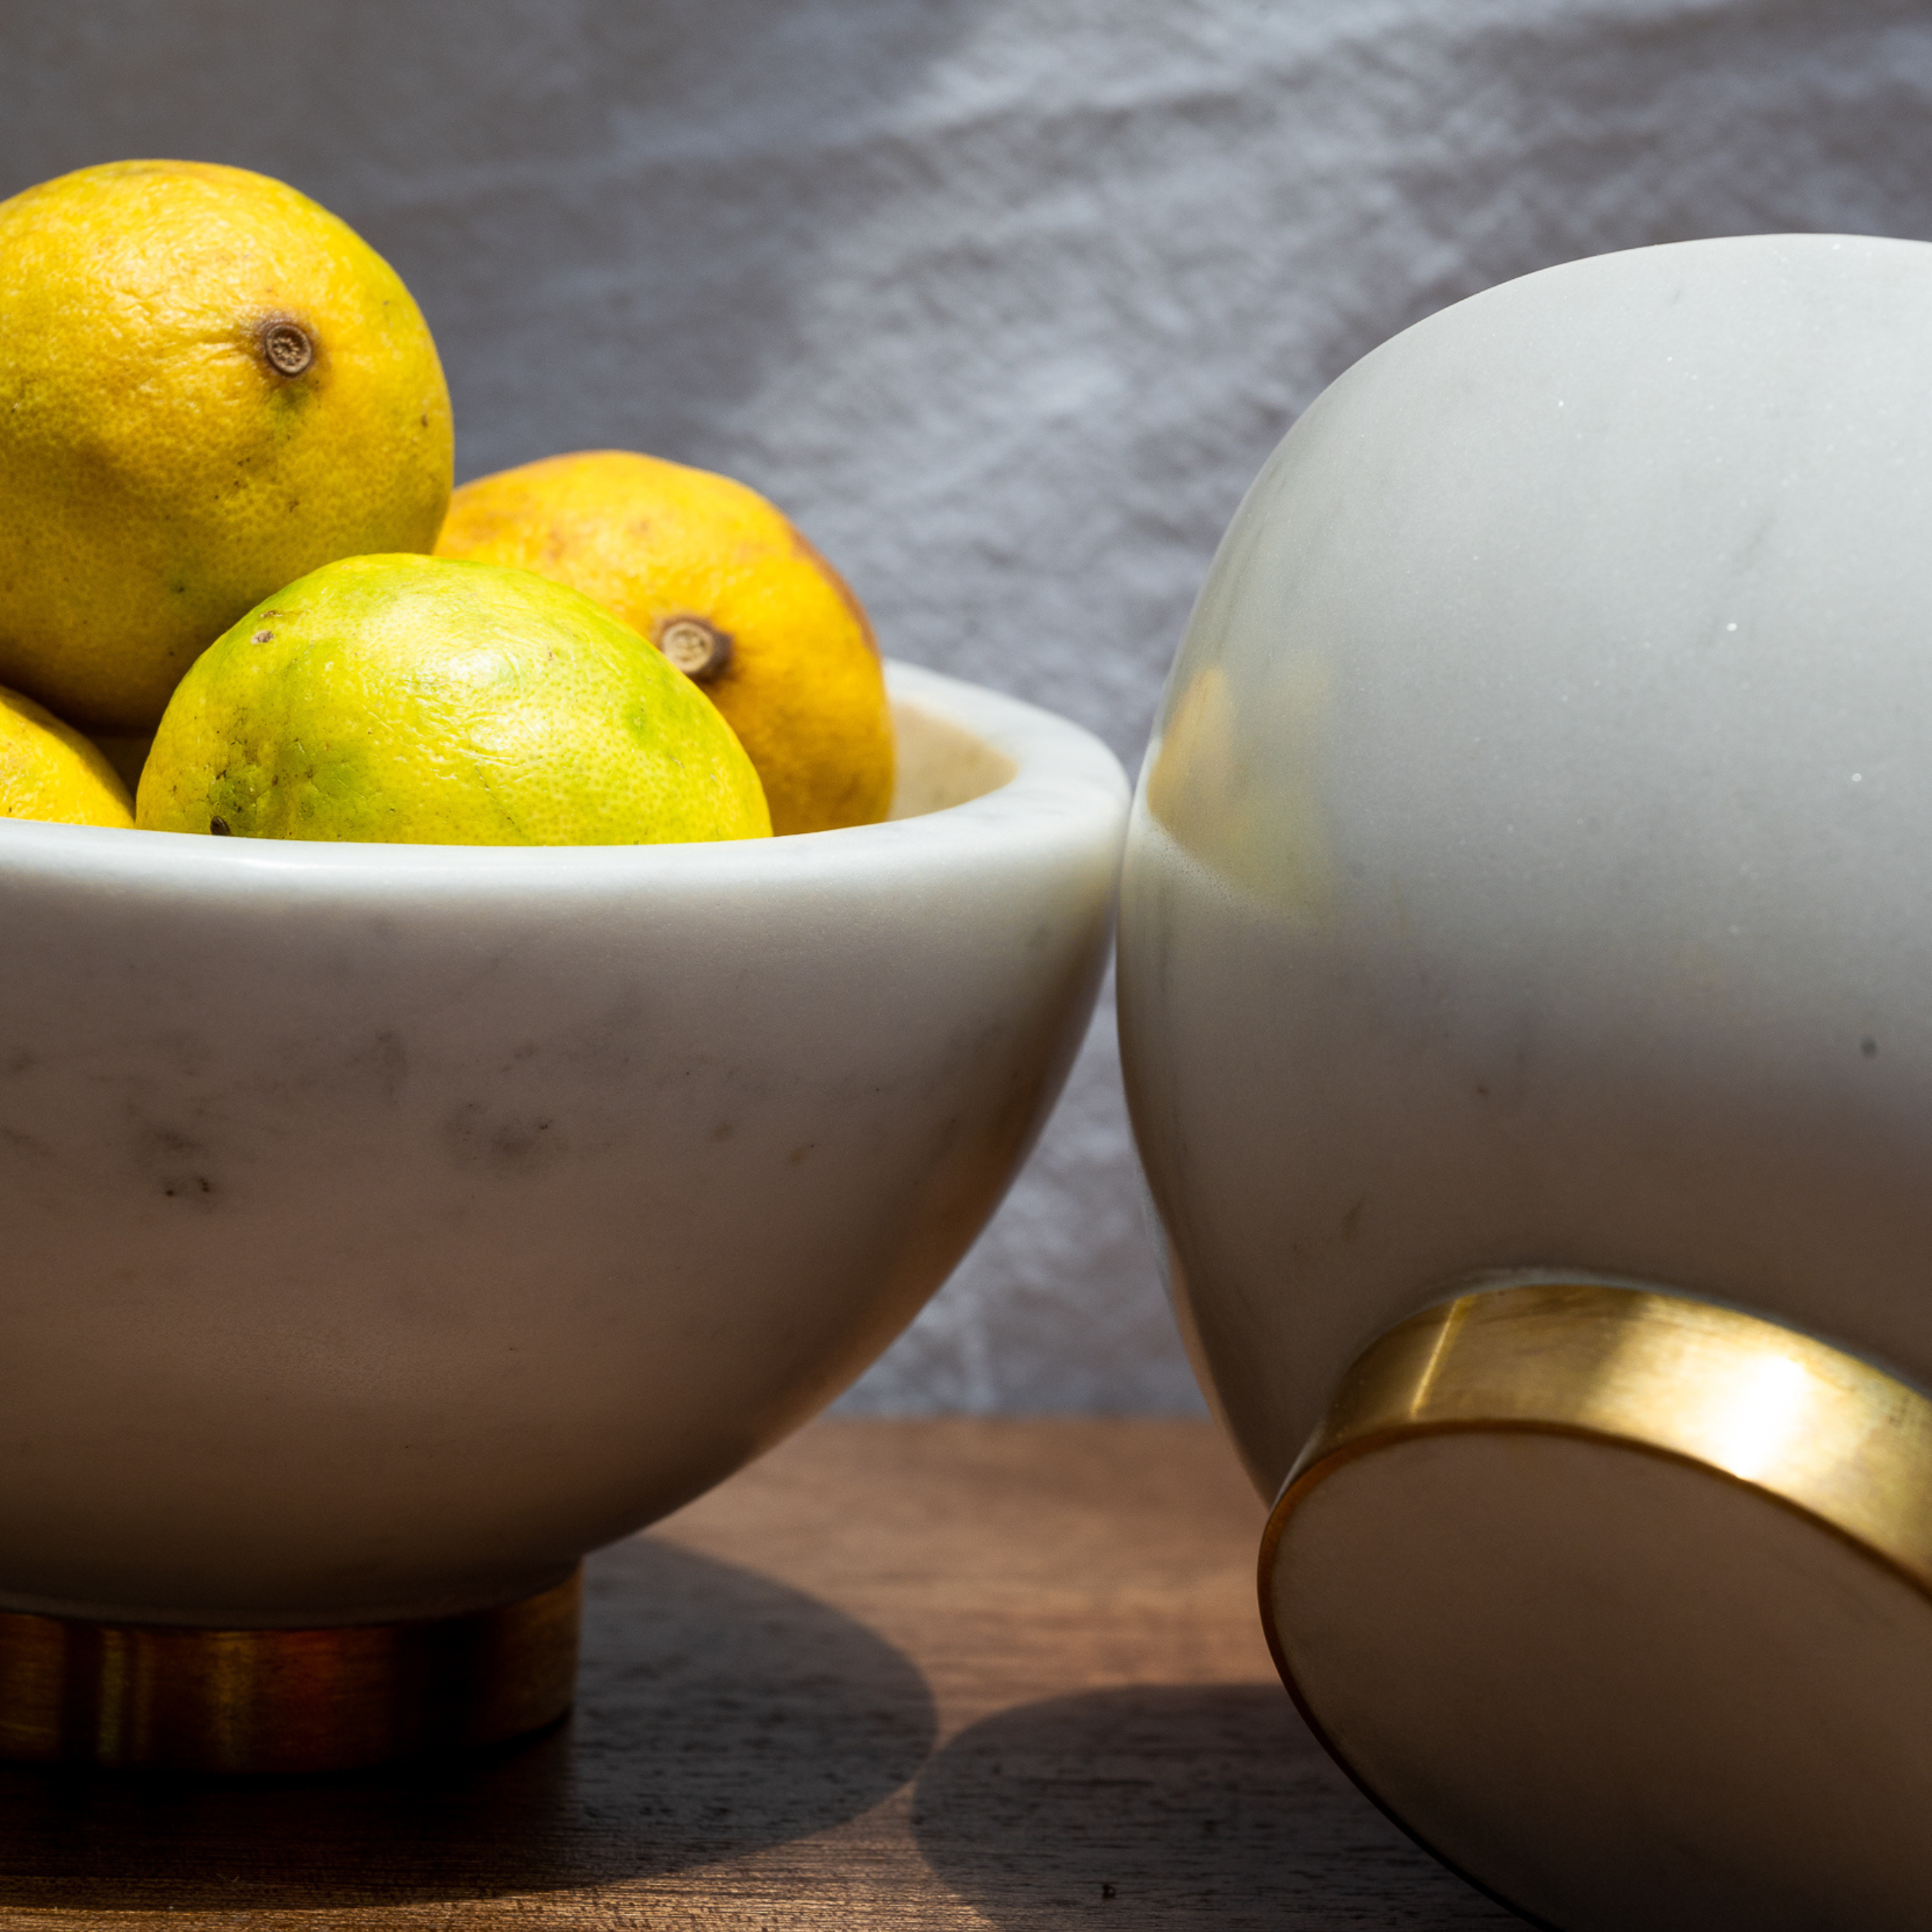 White Marble Bowl with Gold Base